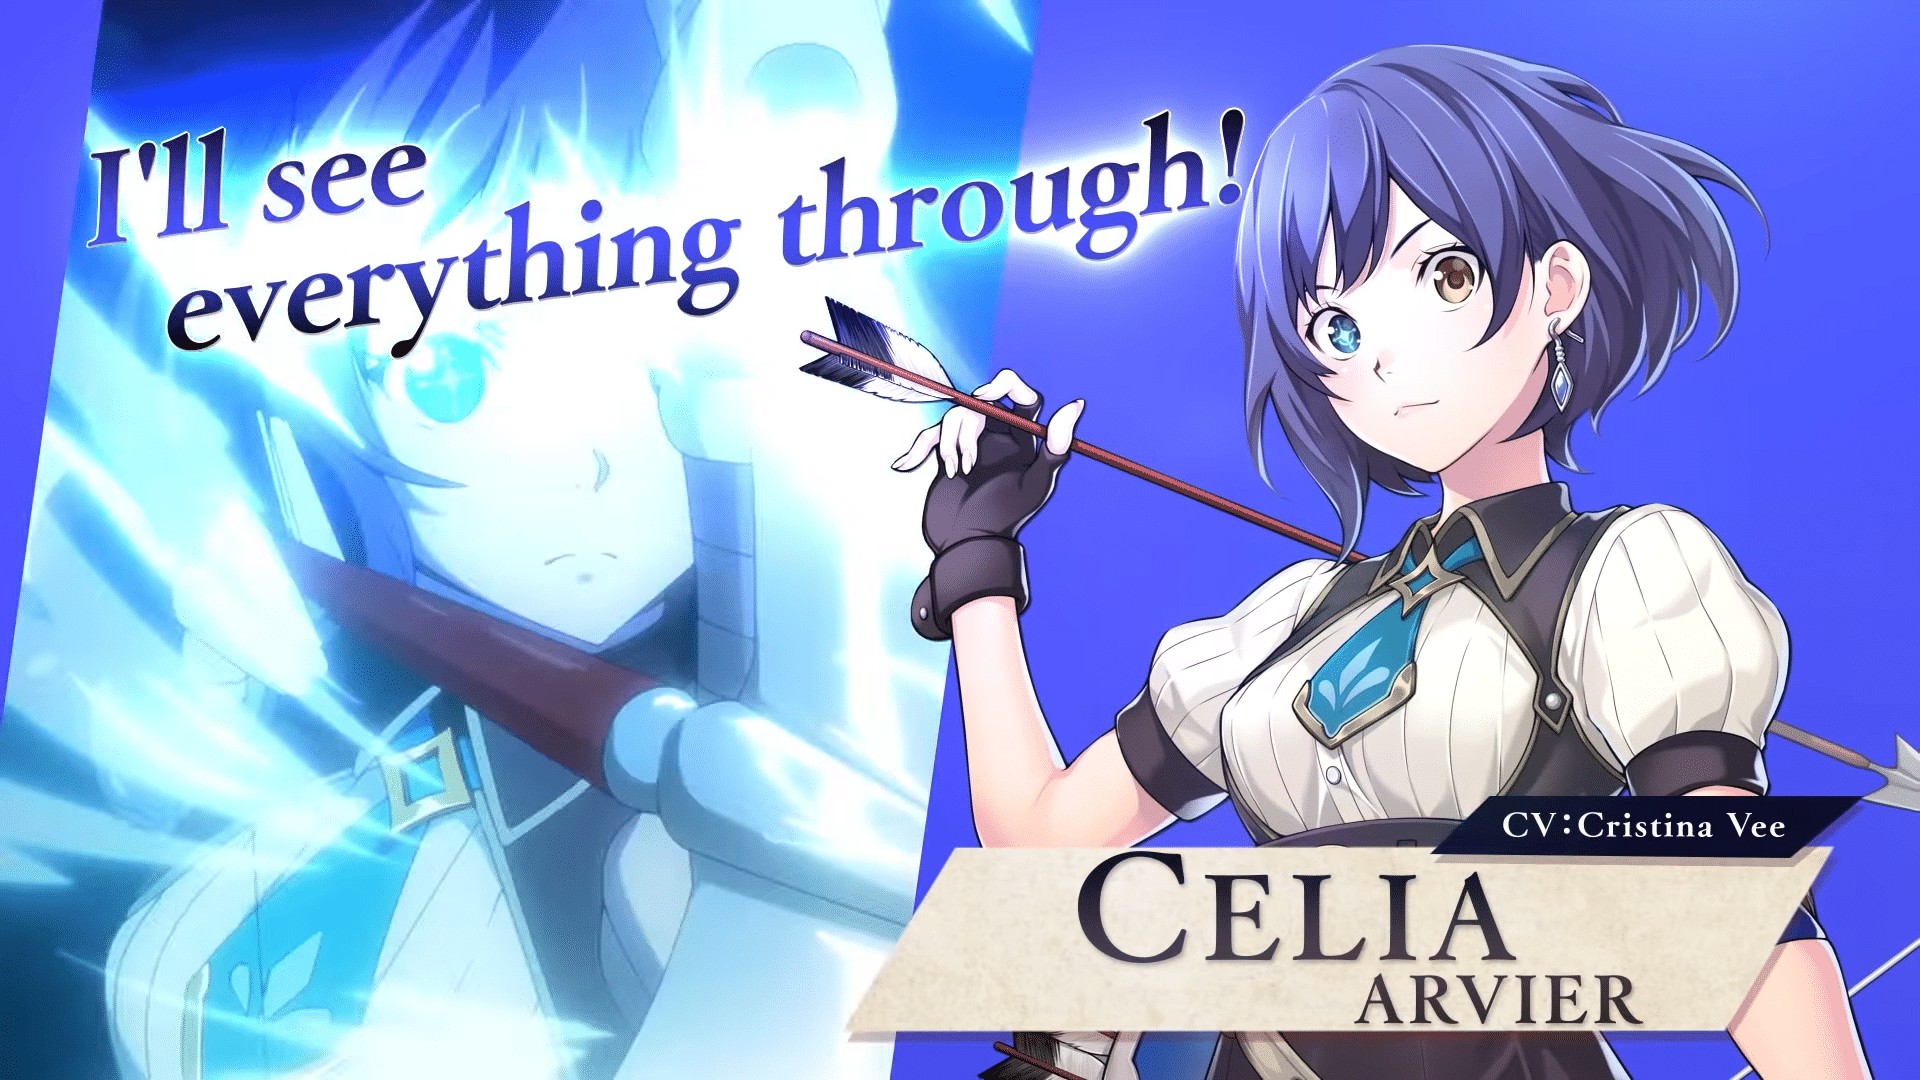 Tales of Luminaria – Celia Arvier Episode 1 Overview – The Selection Exam